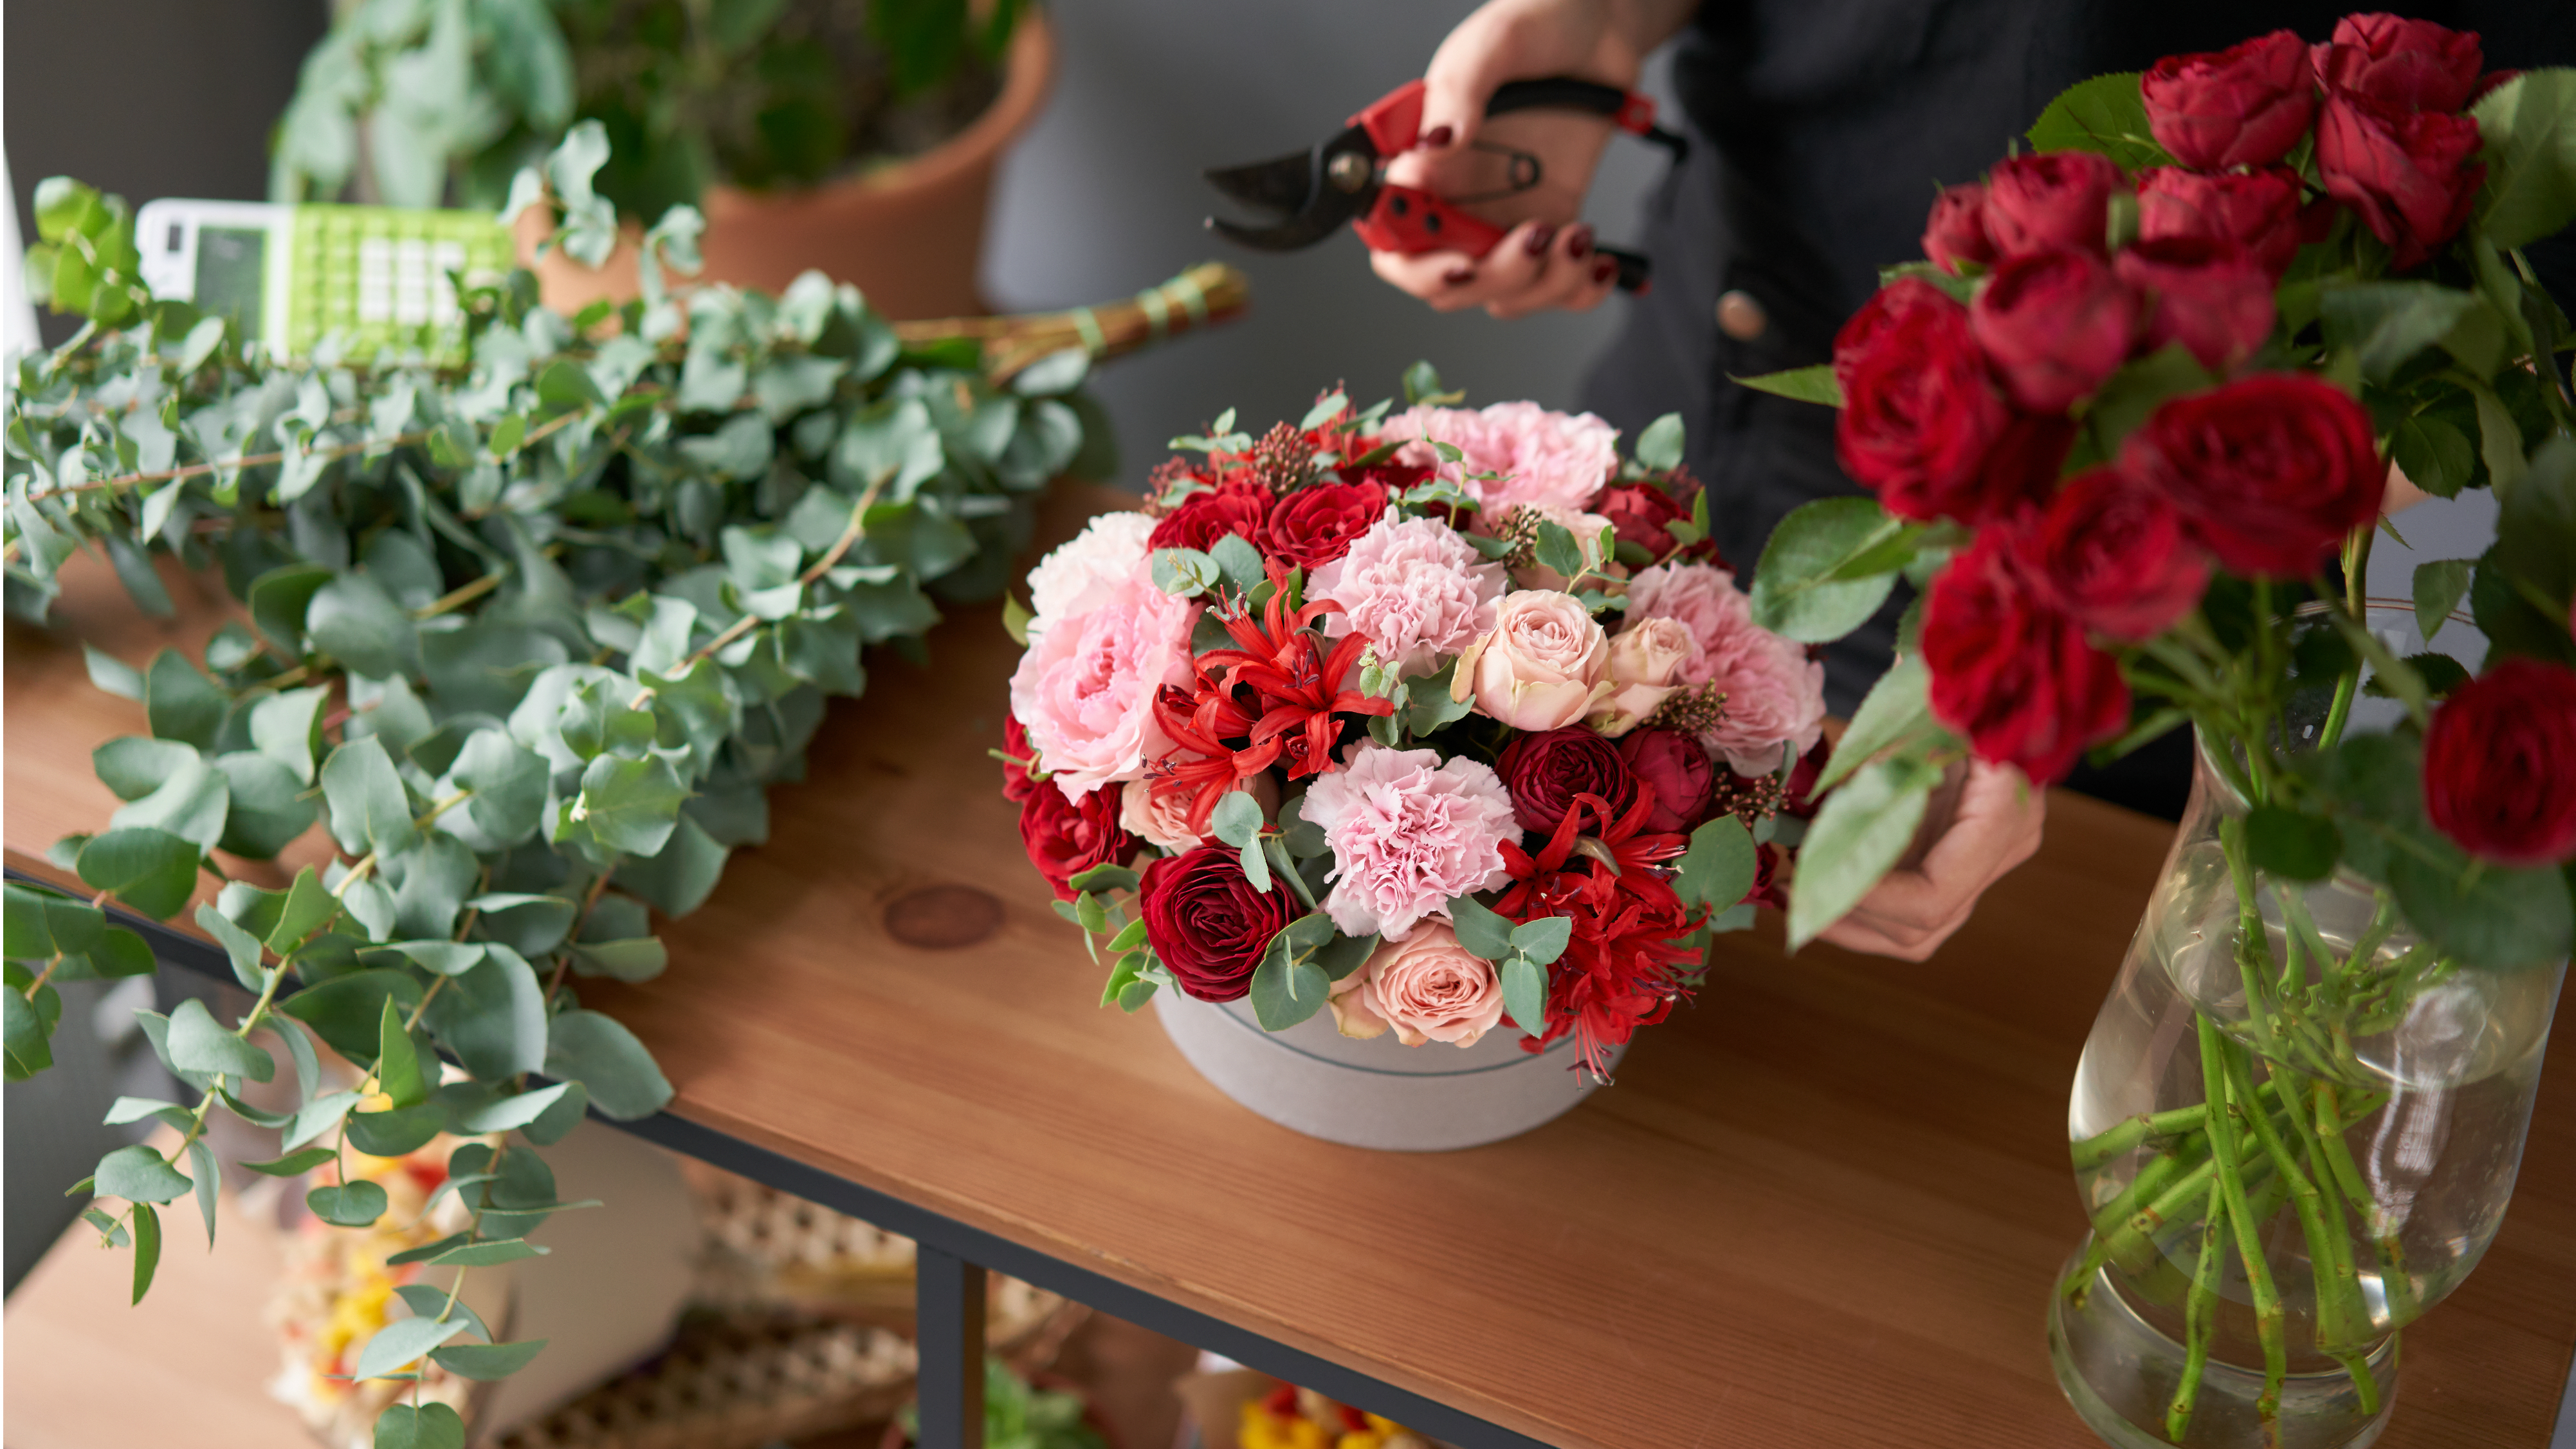 Online Florist: A Blessing in Disguise